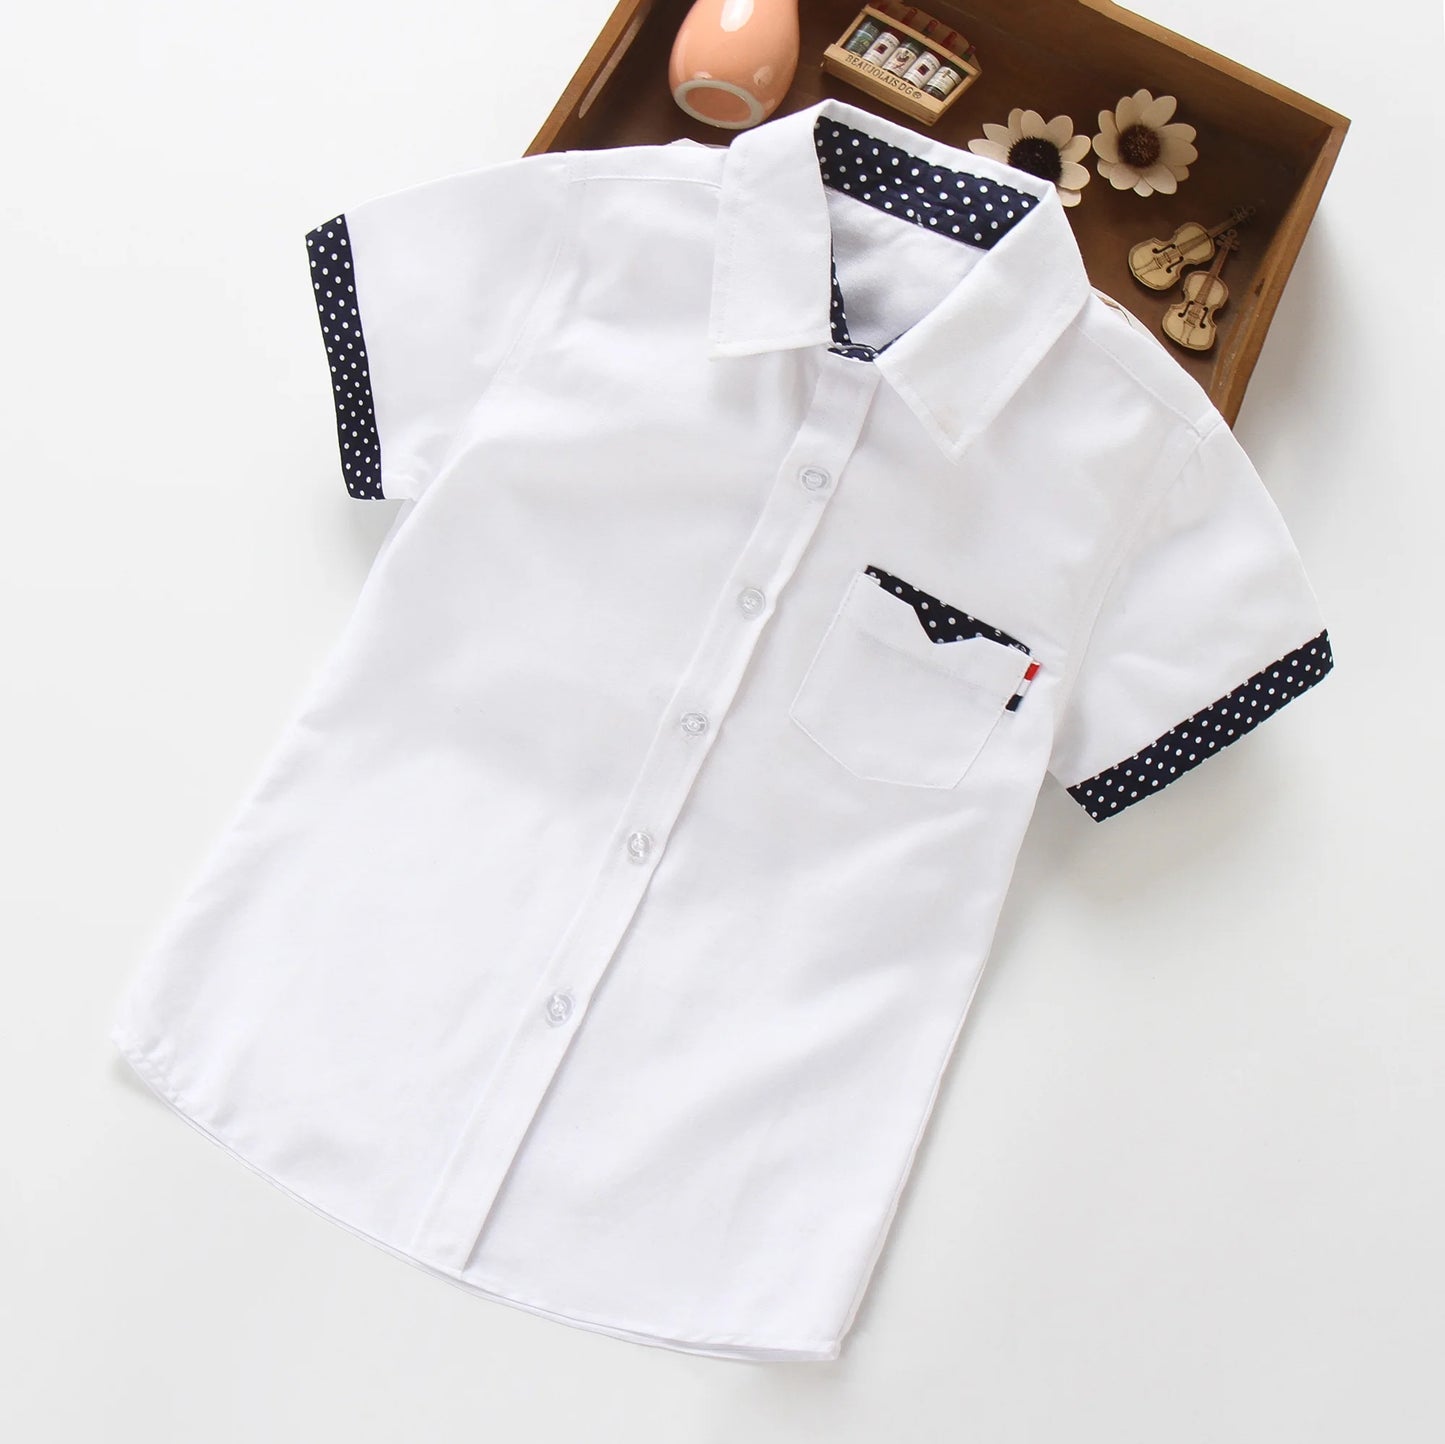 IENENS Kids Boy Shirts Clothes Solid Color 3-11Y Baby Shorts Sleeve Shirt Summer Tops Tees Shirts Children Cotton Blouse